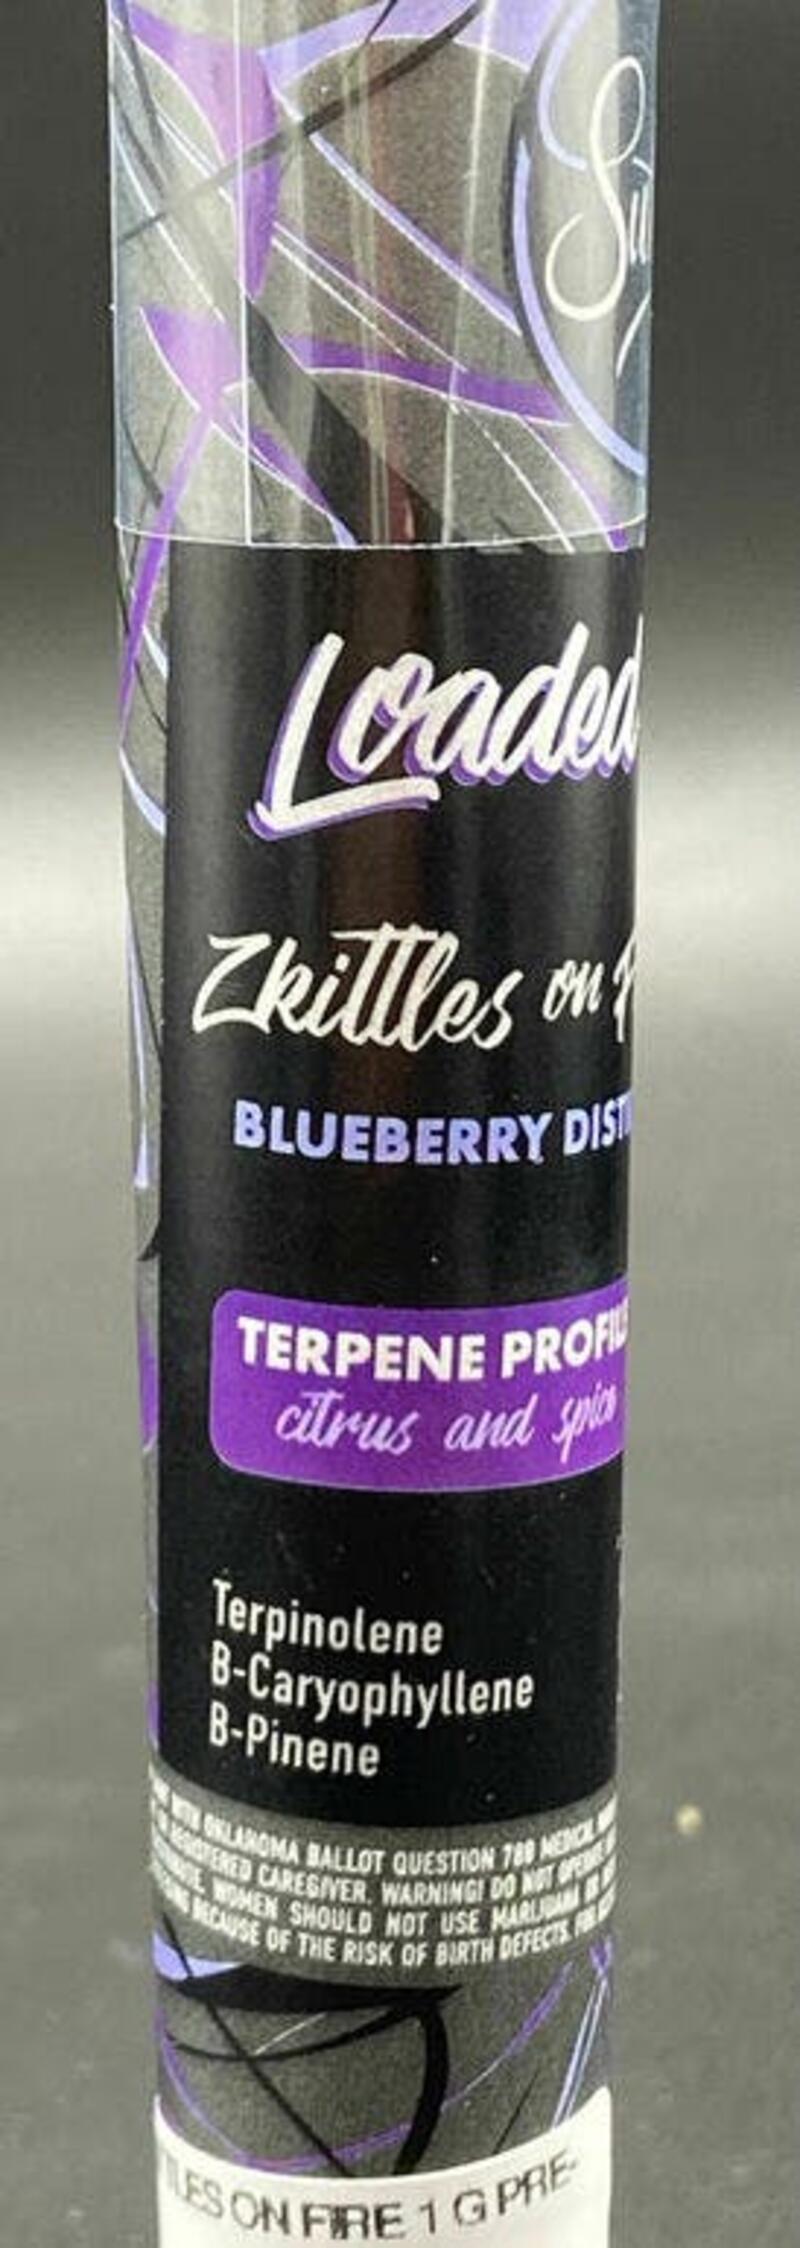 Sublime - Zkittles on Fire "Blueberry Distillate Infusion" Loaded Joint 1g (OTD - TAX INCLUDED)